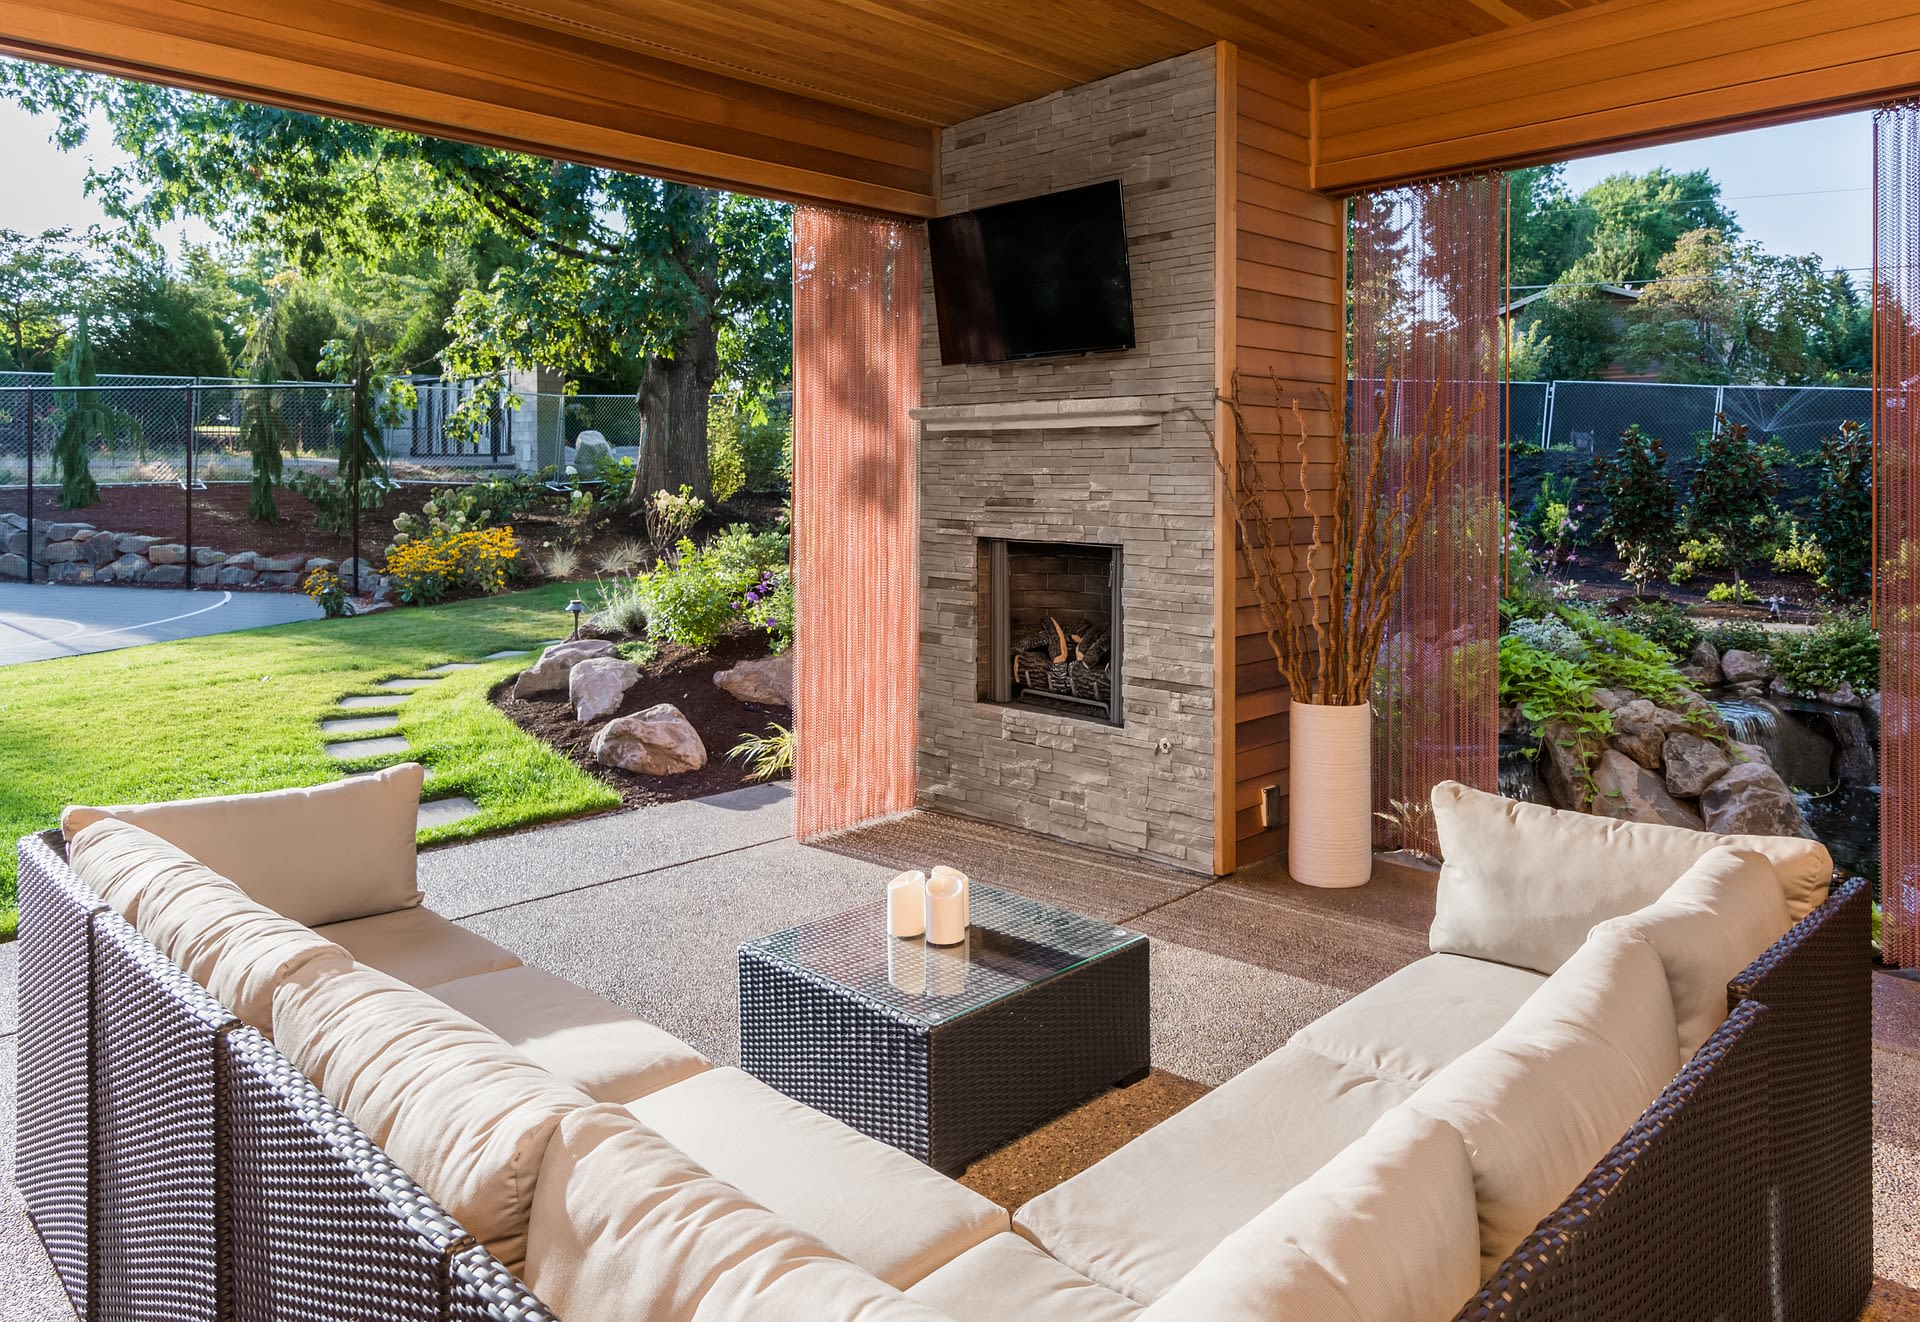 outdoor living - what buyers want - patio - extra living space